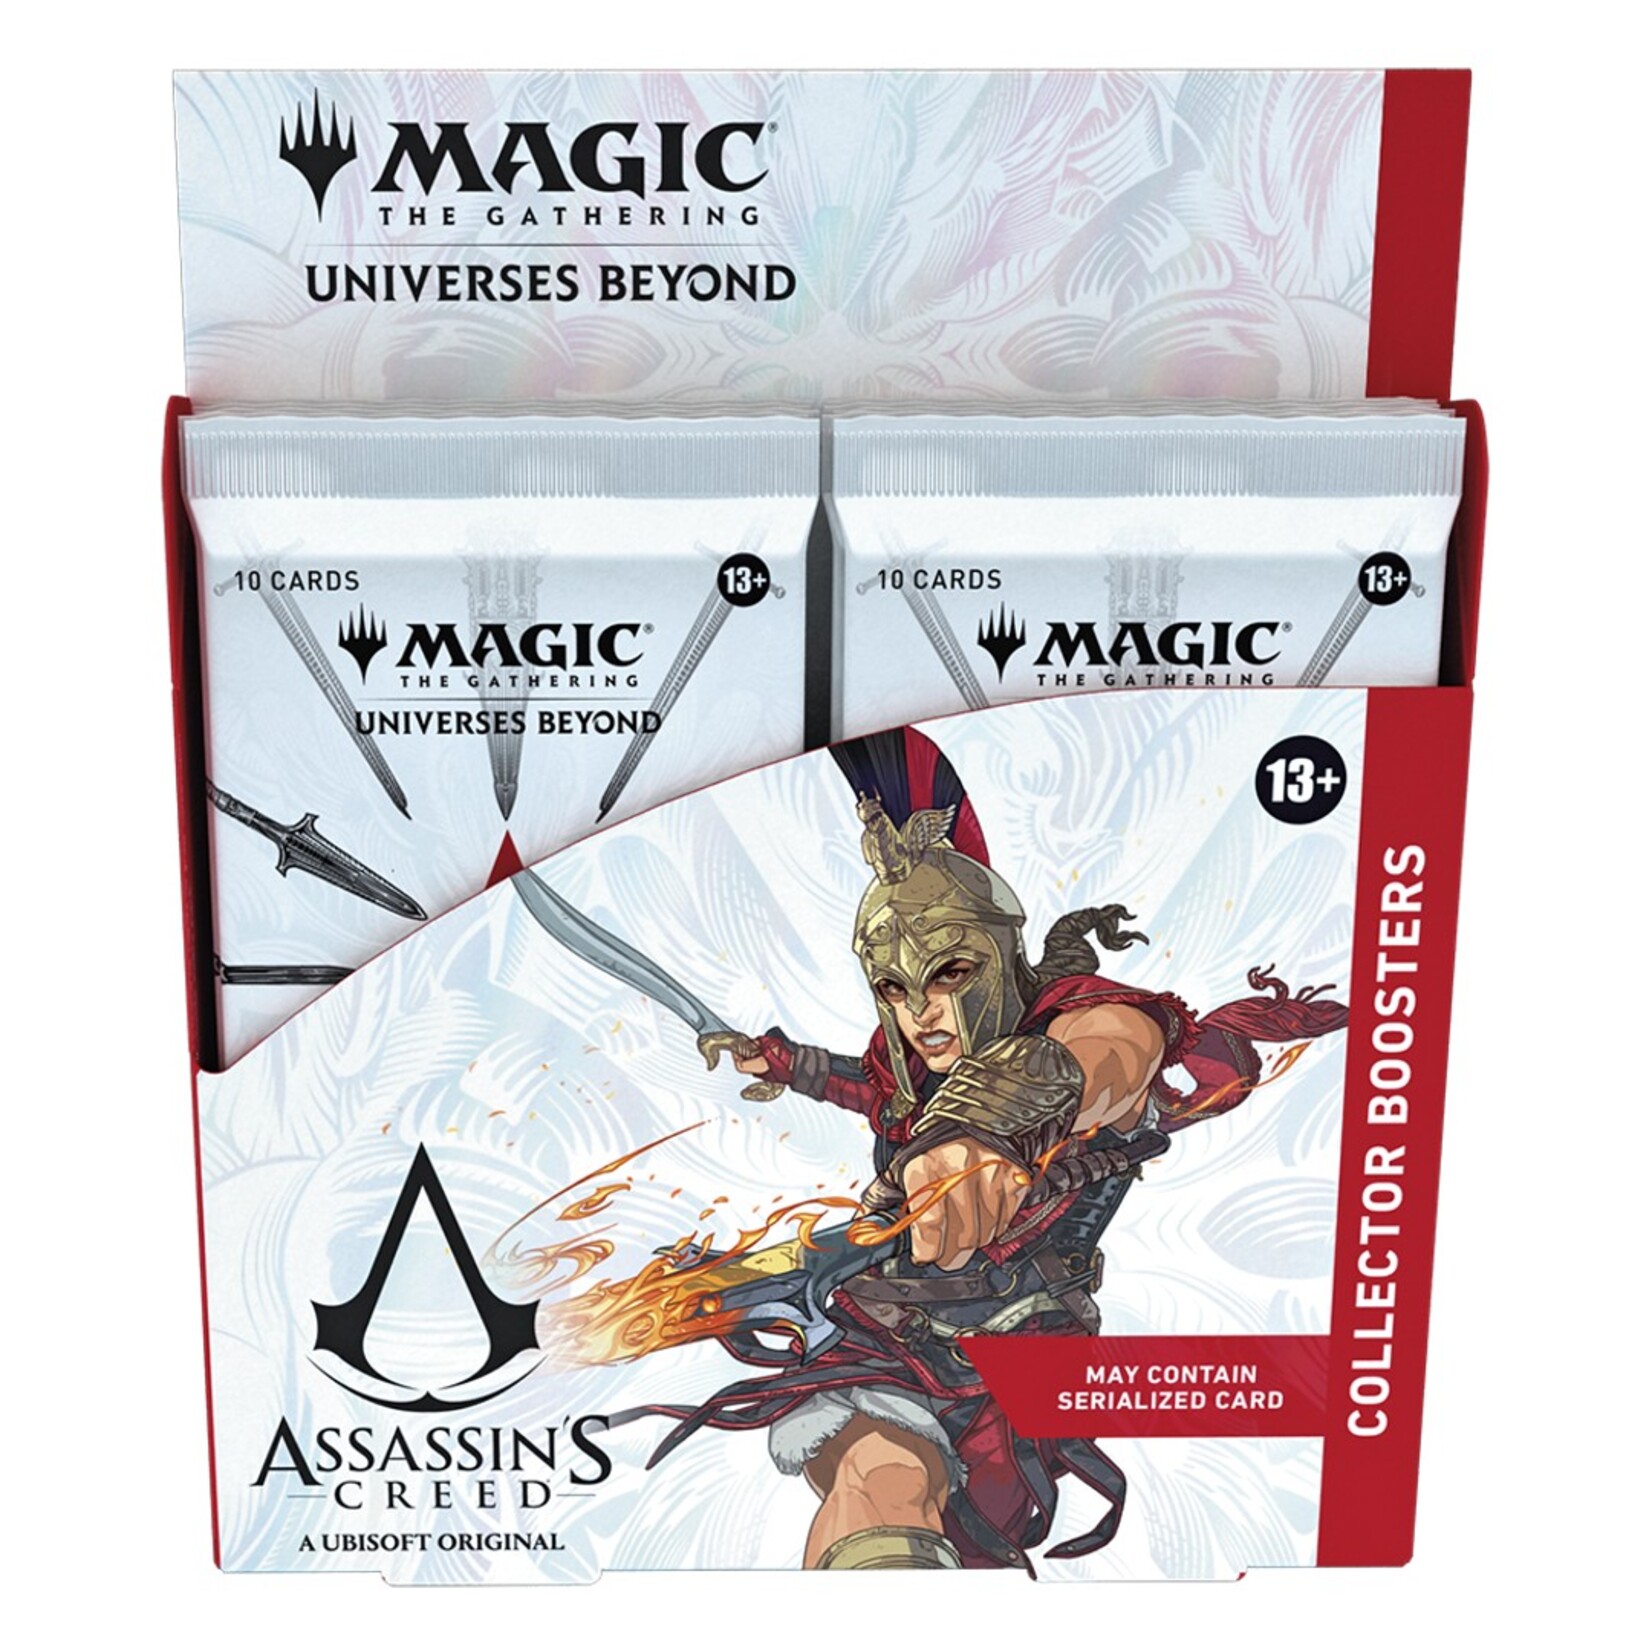 Wizards of the Coast Magic the Gathering Assassin's Creed Collector Booster Box